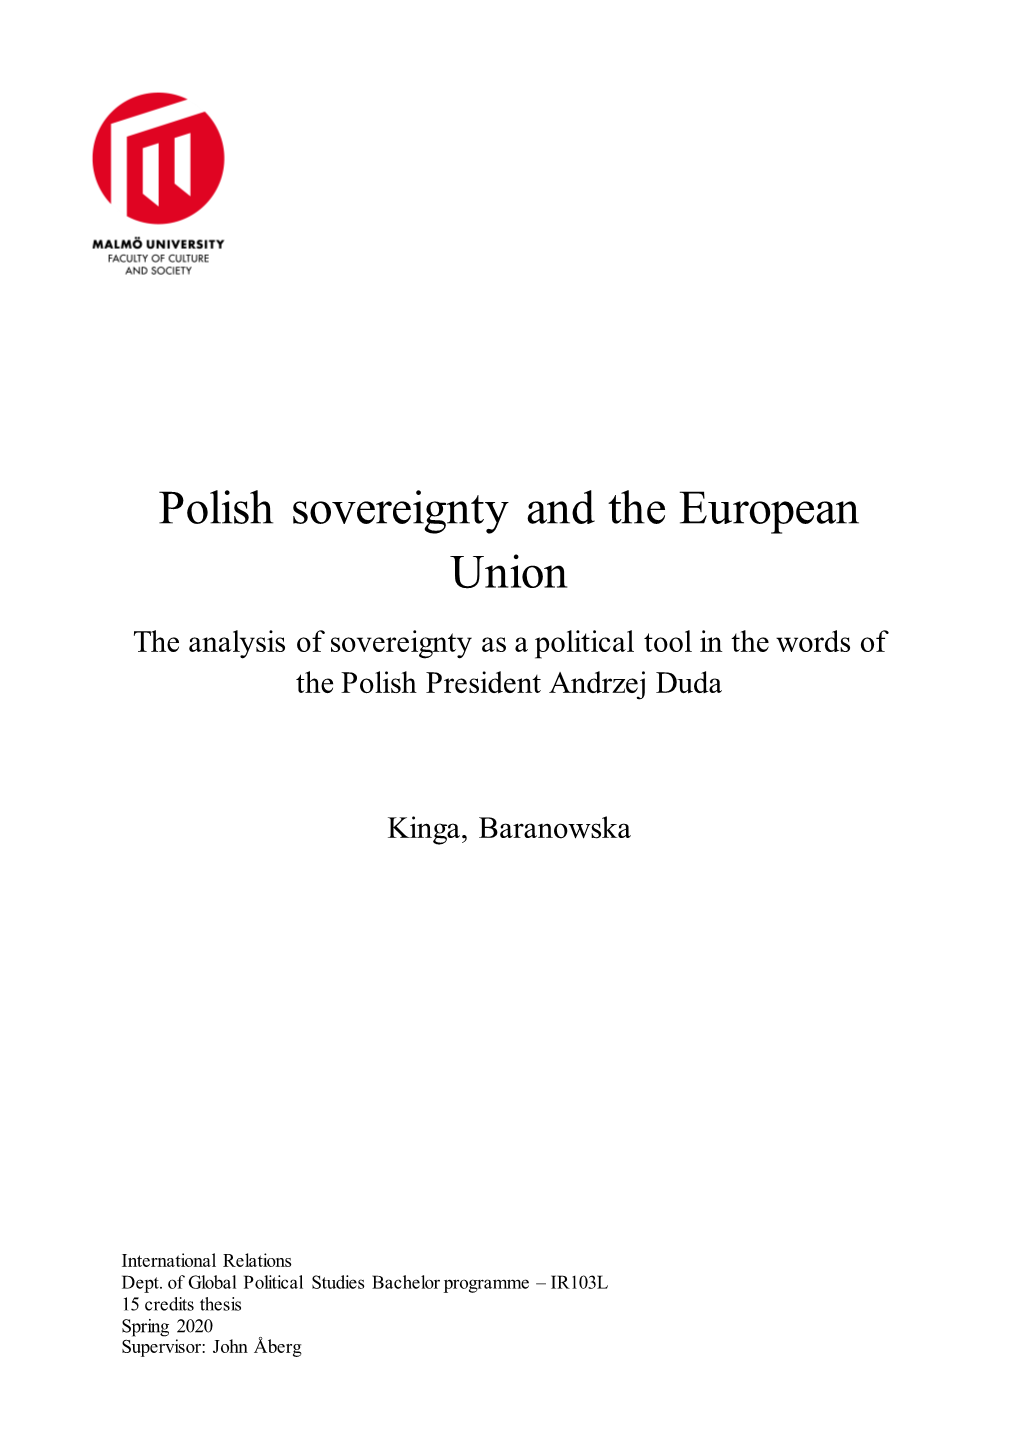 Polish Sovereignty and the European Union the Analysis of Sovereignty As a Political Tool in the Words of the Polish President Andrzej Duda